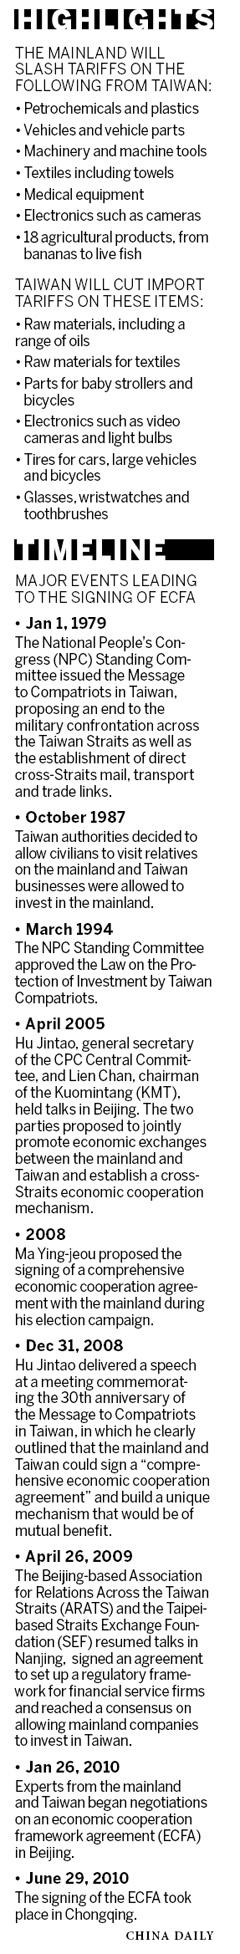 Mainland-Taiwan banking sector to open further